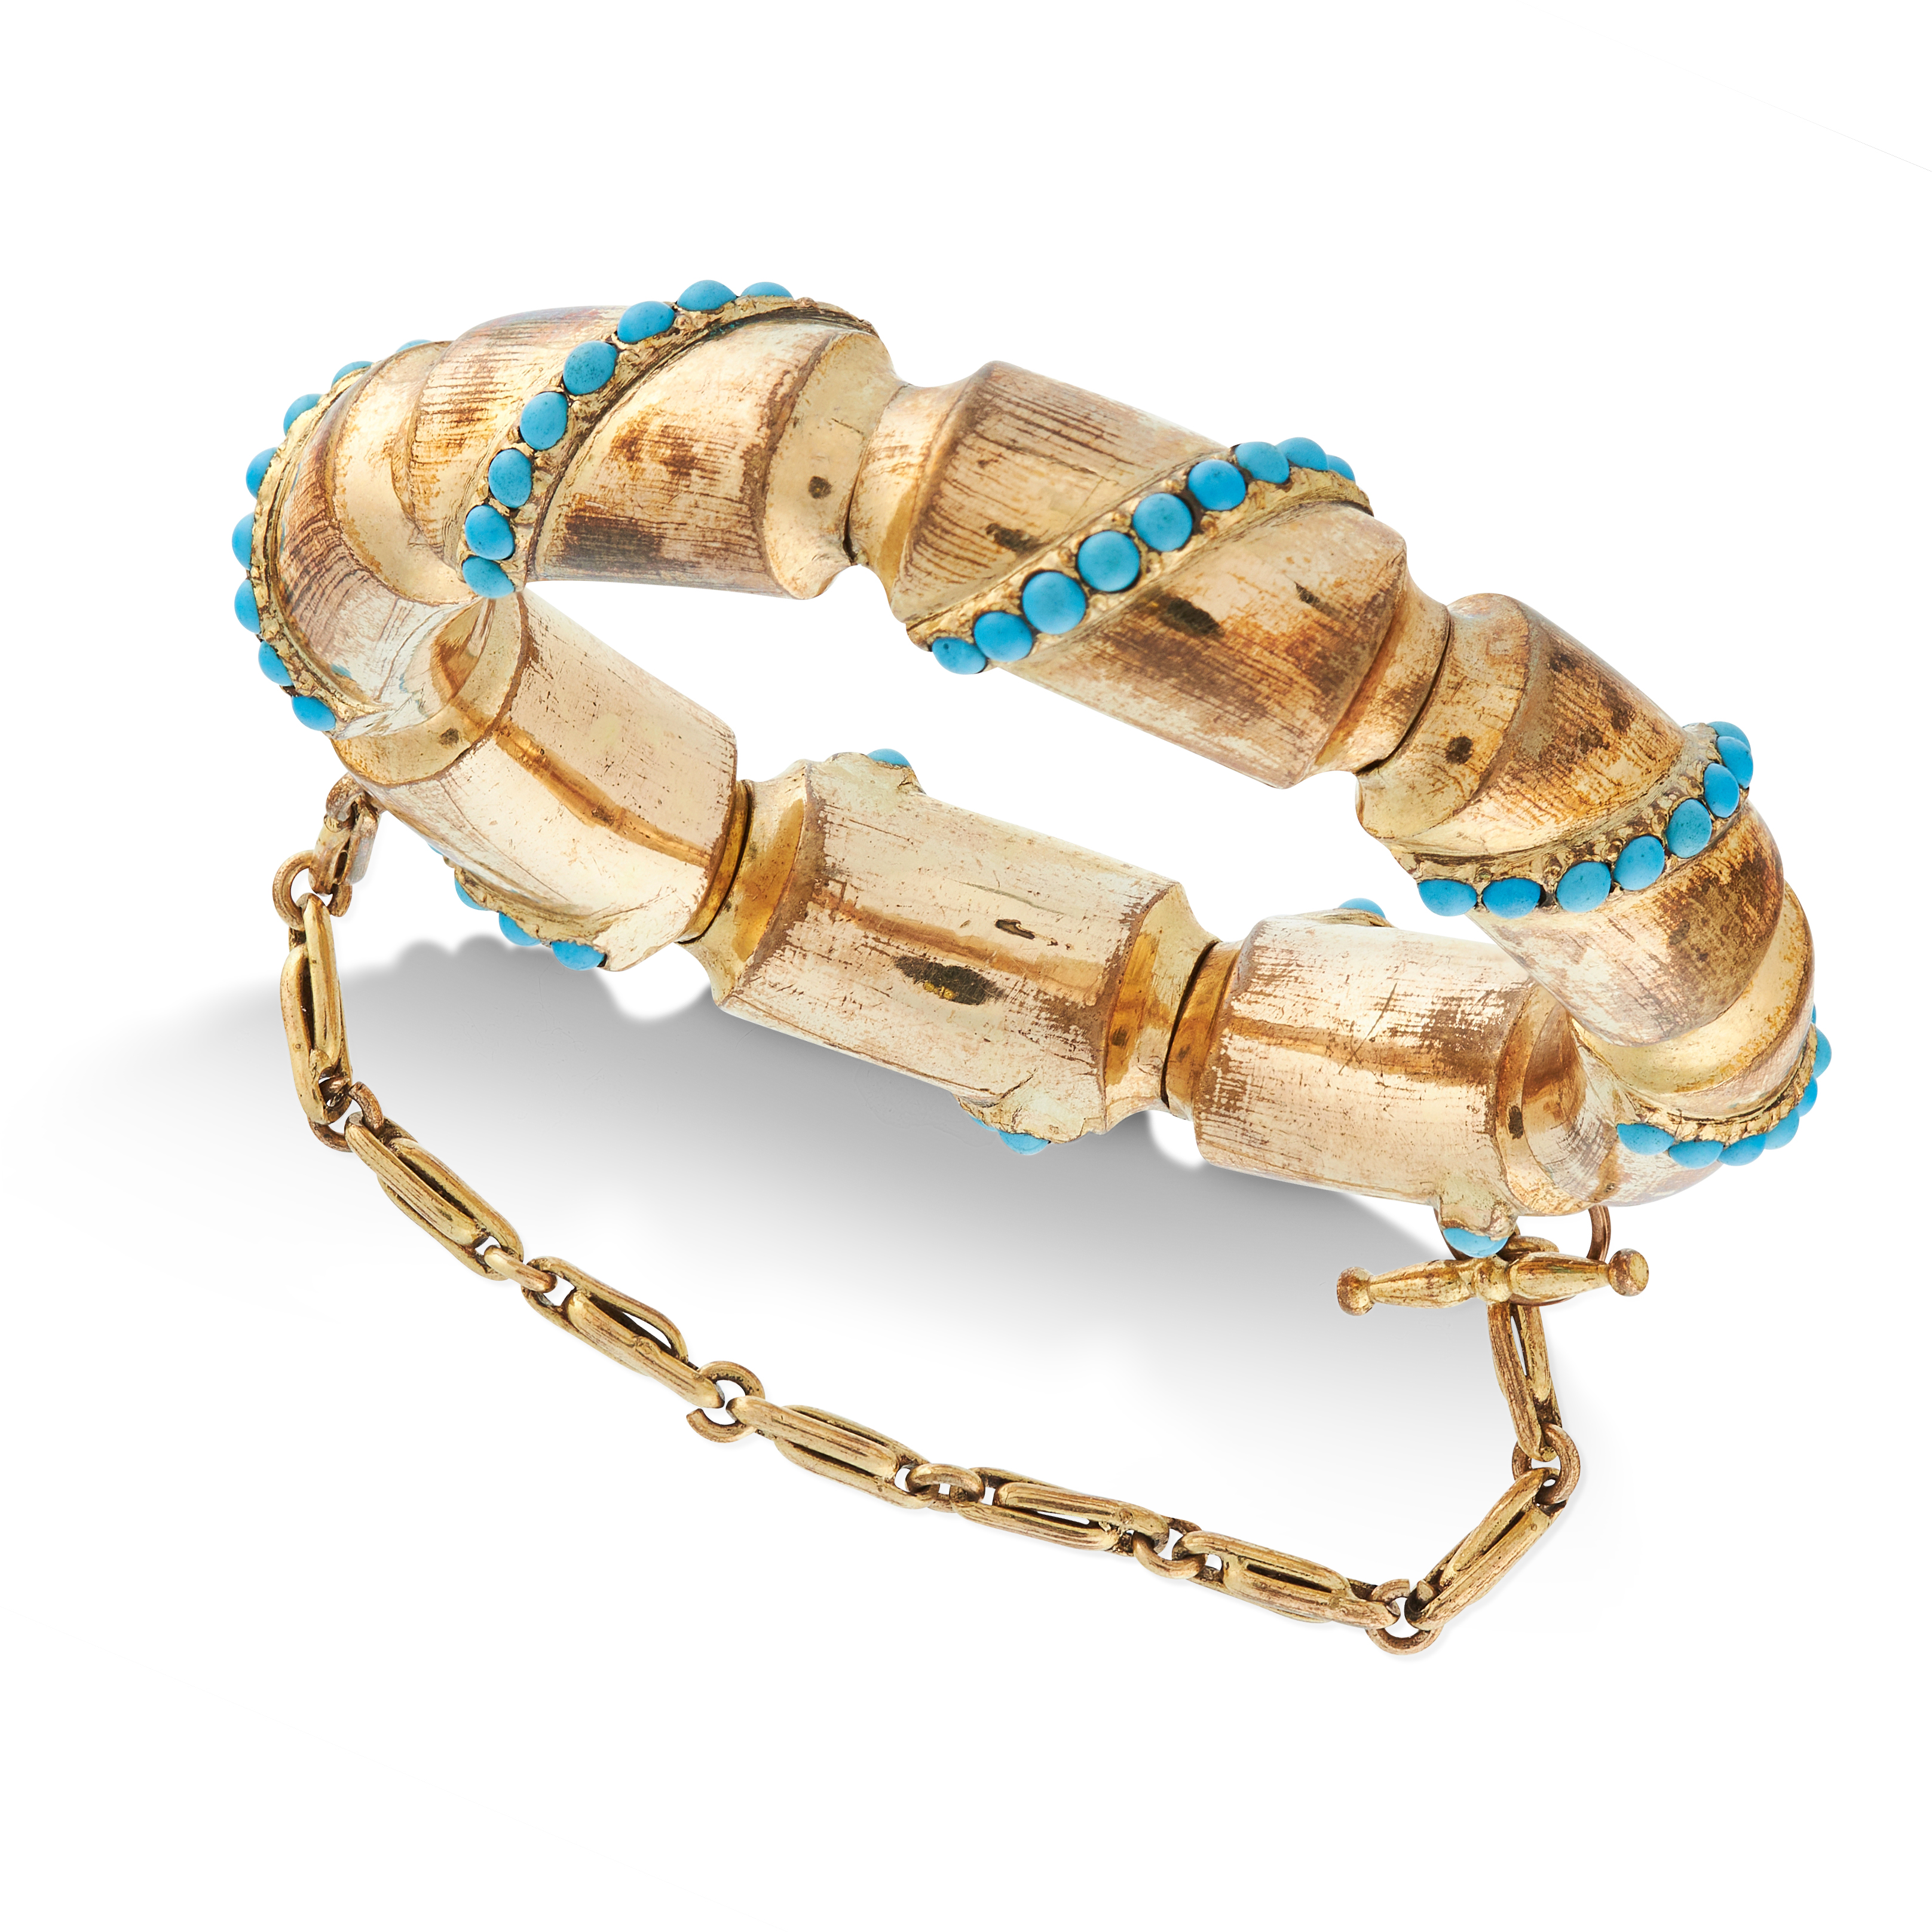 AN ANTIQUE ARTICULATED TURQUOISE BANGLE, 19TH CENTURY formed of eight tubular links set with rows of